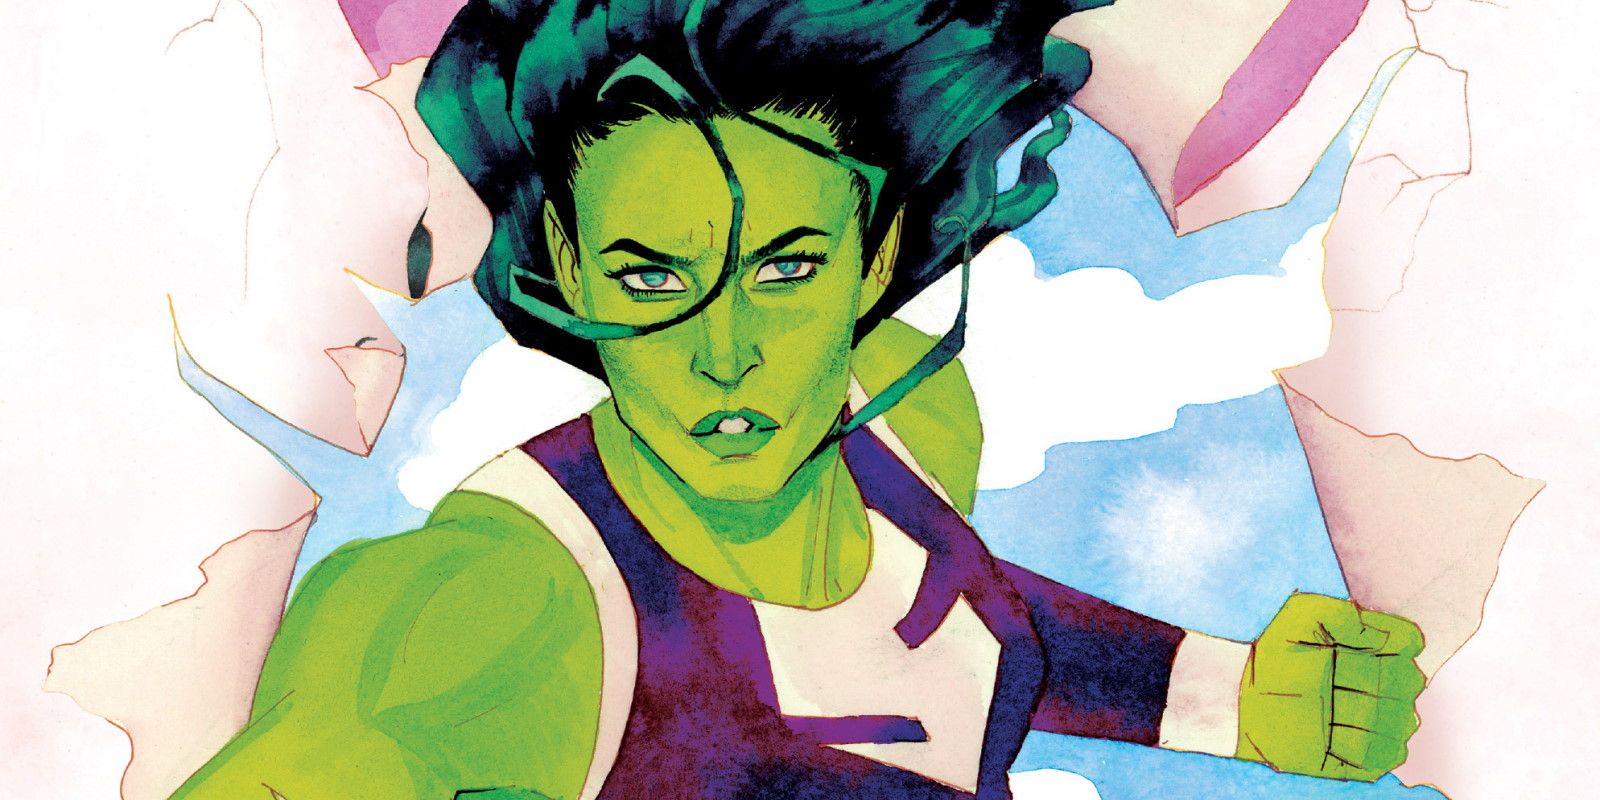 An image of She-Hulk bursting through the page in her modern costume in the comics.